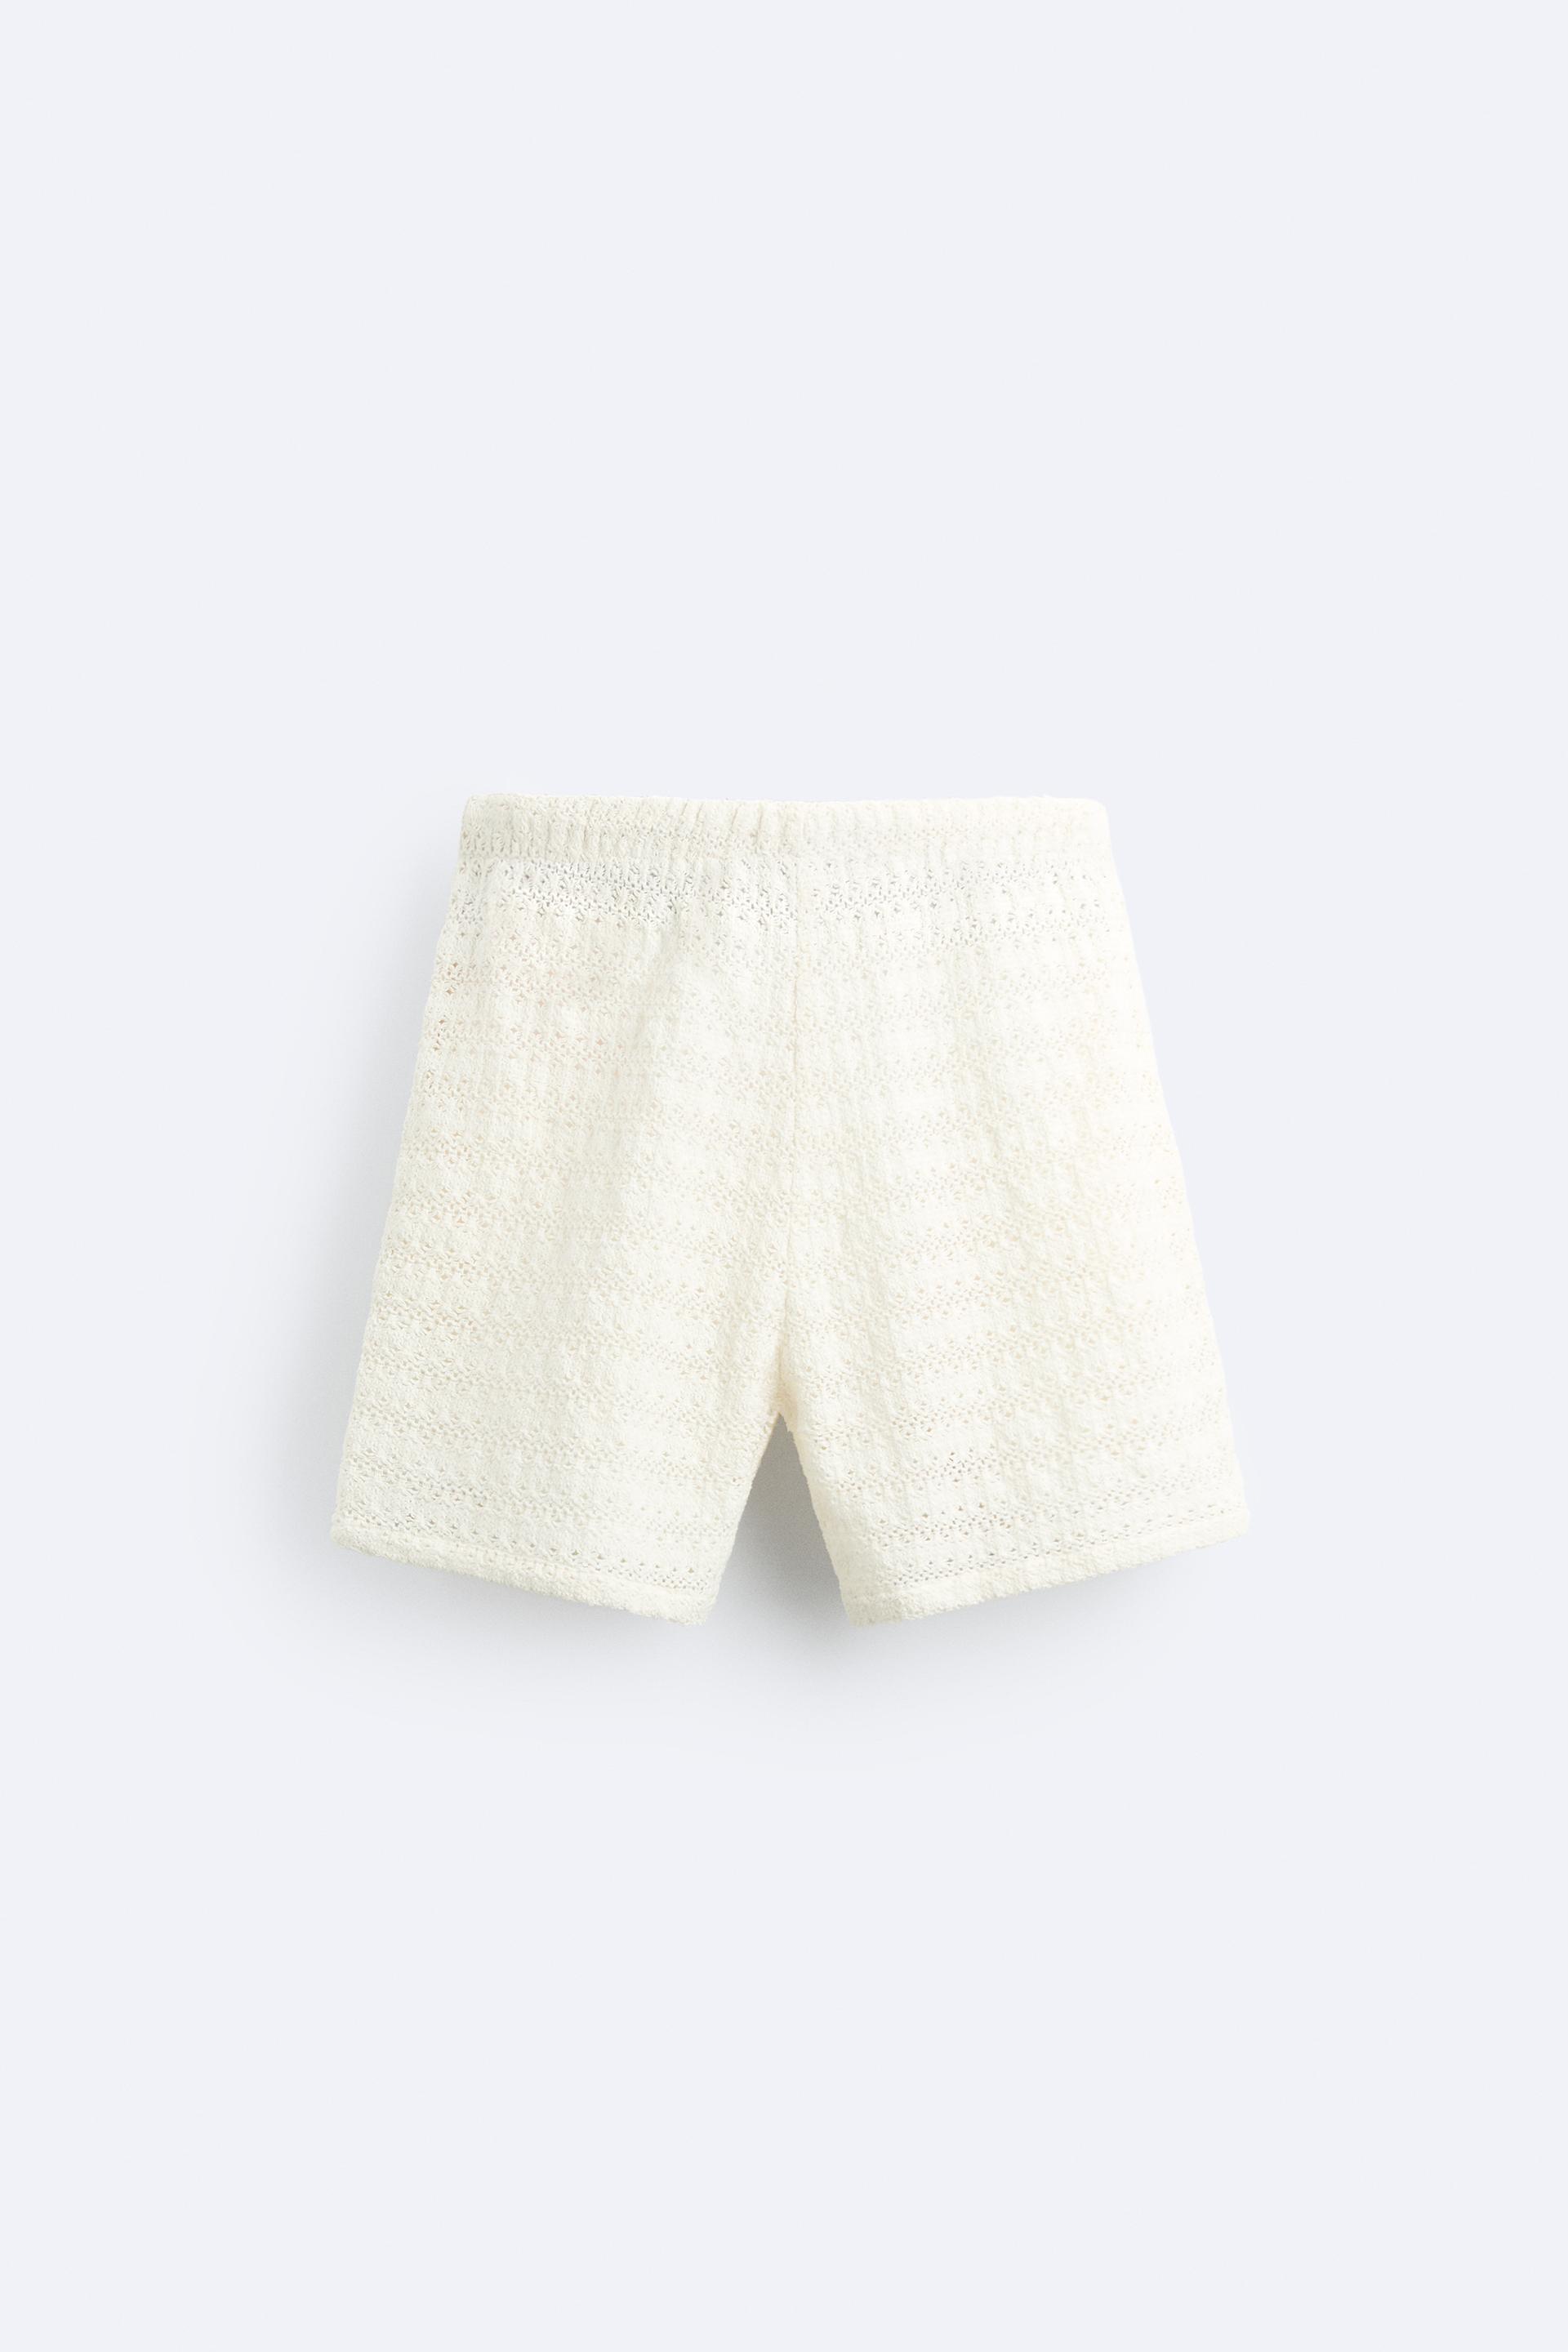 STRUCTURED CROCHET SHORTS - Oyster-white